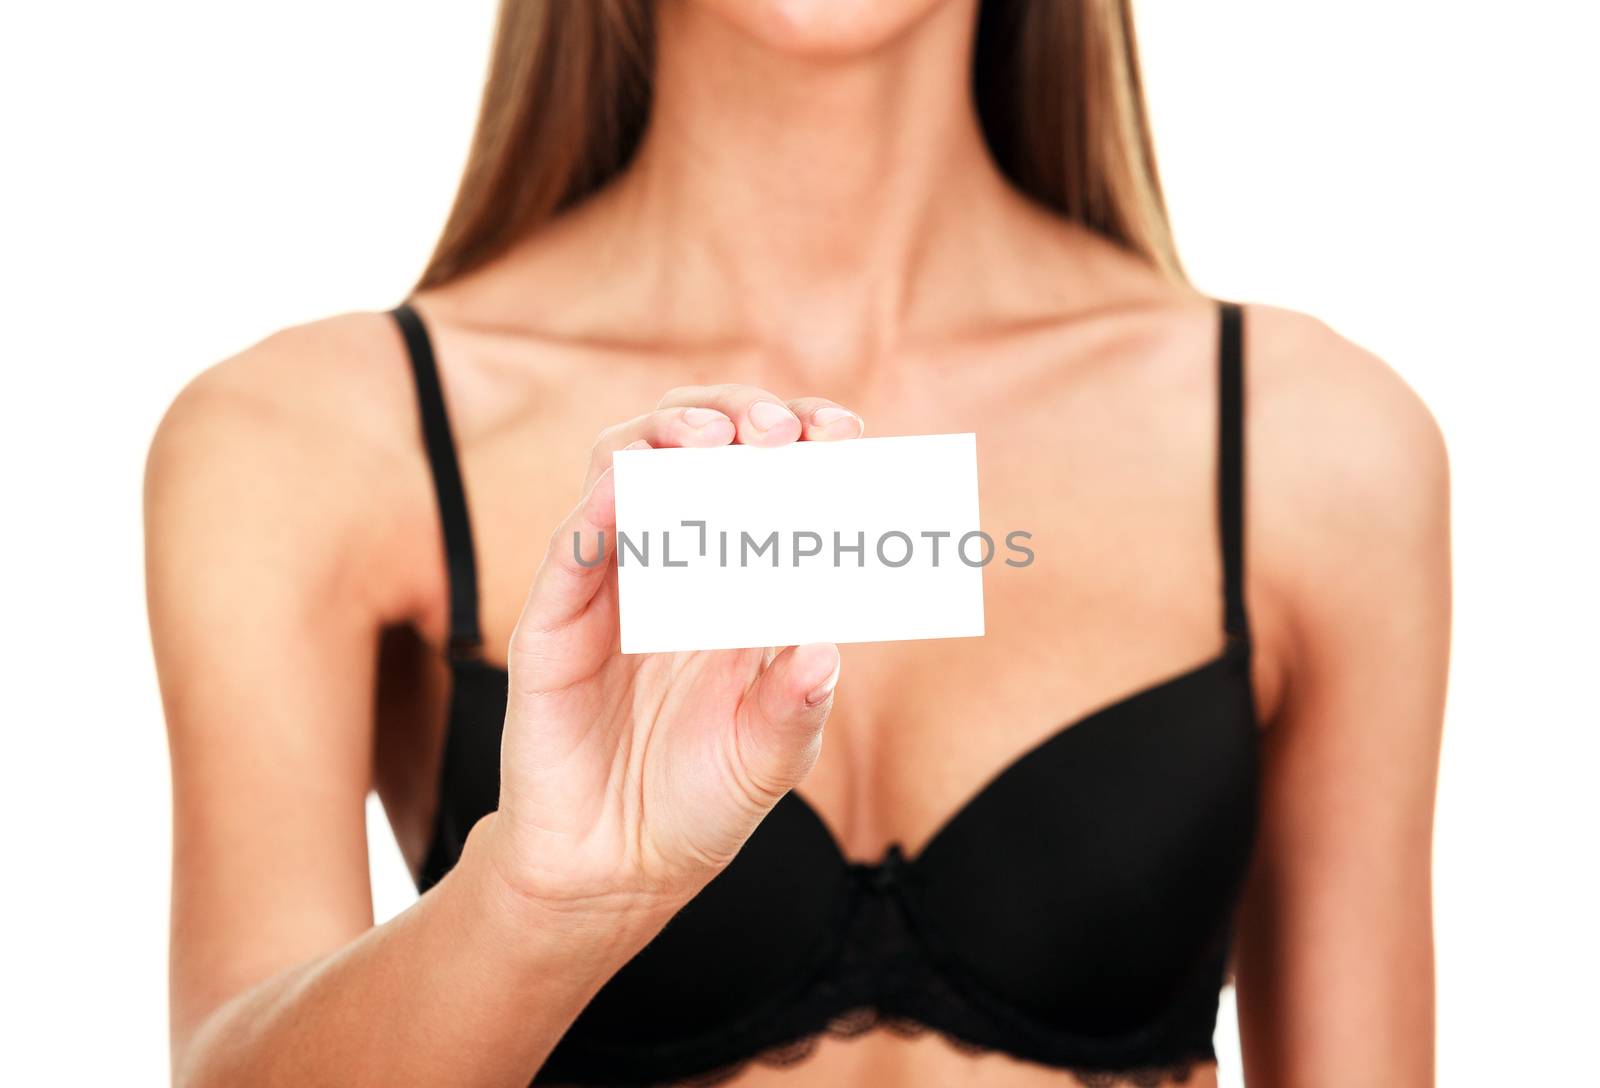 Woman in black bra shows empty card, isolated on white background